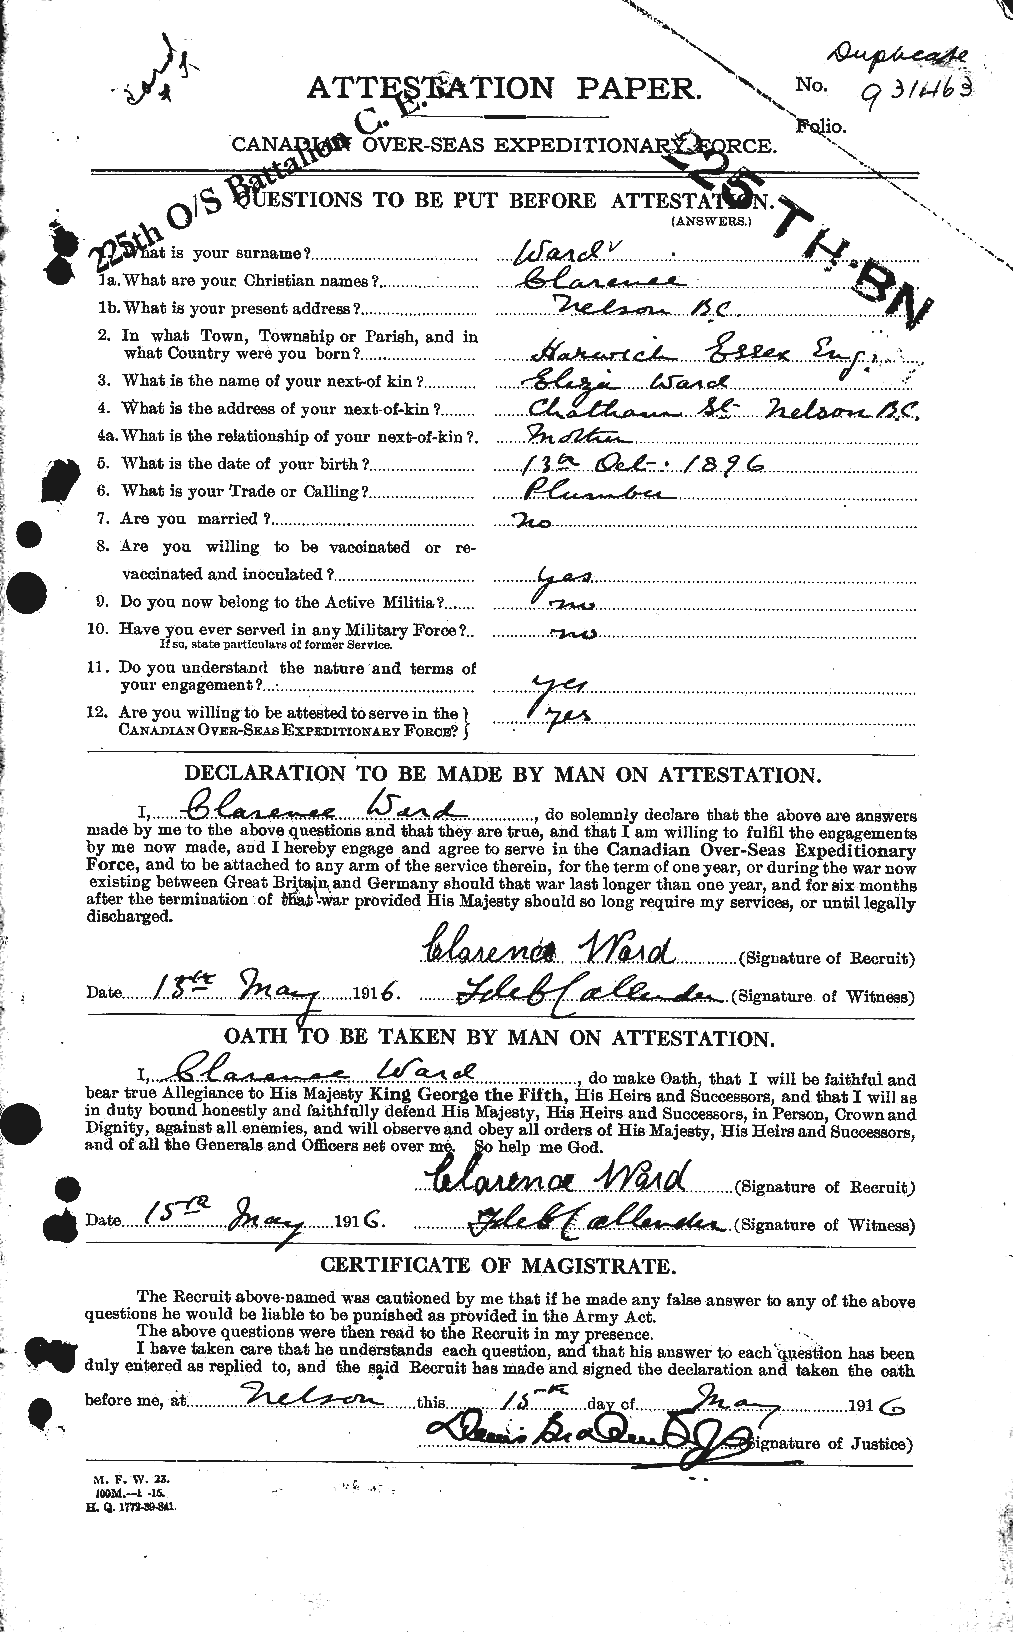 Personnel Records of the First World War - CEF 657603a